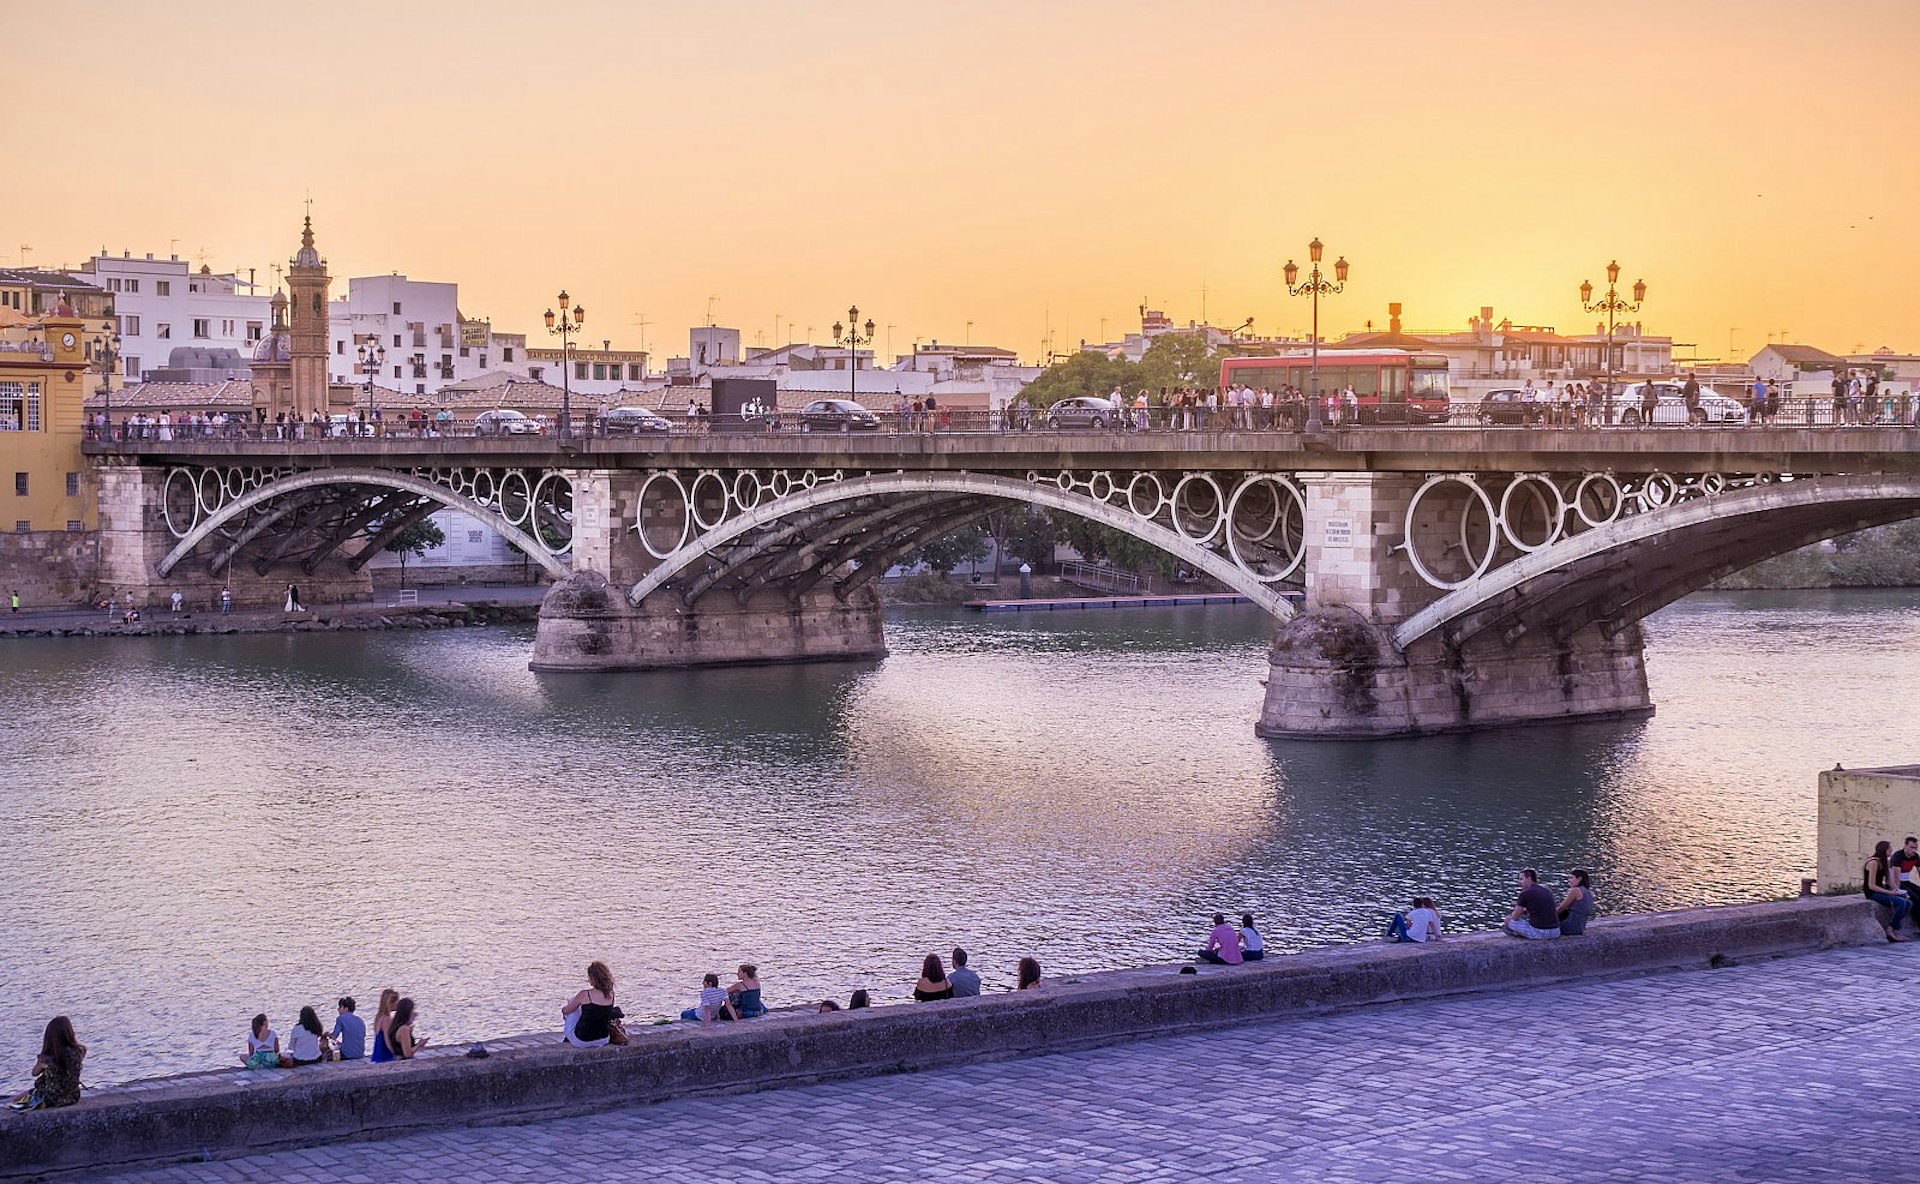 Sunset over the stone Triana bridge and the river Guadalquivir in Seville; in the foreground, people are sitting on a stone wall beside the river.